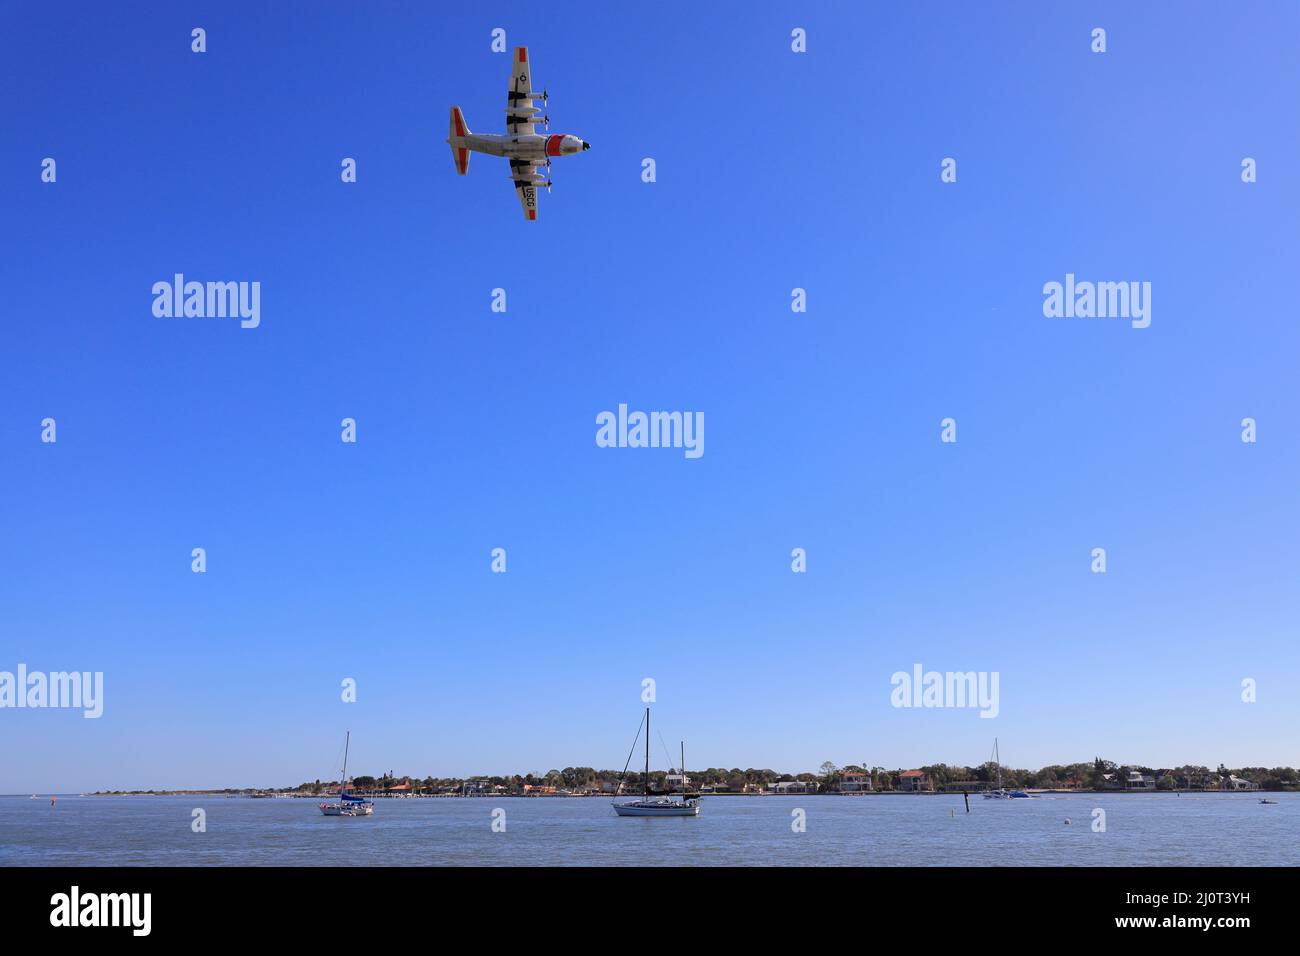 A US Coast Guard Lockheed C-130 Hercules airplane flying over the old town of Saint Augustine.Florida.USA Stock Photo